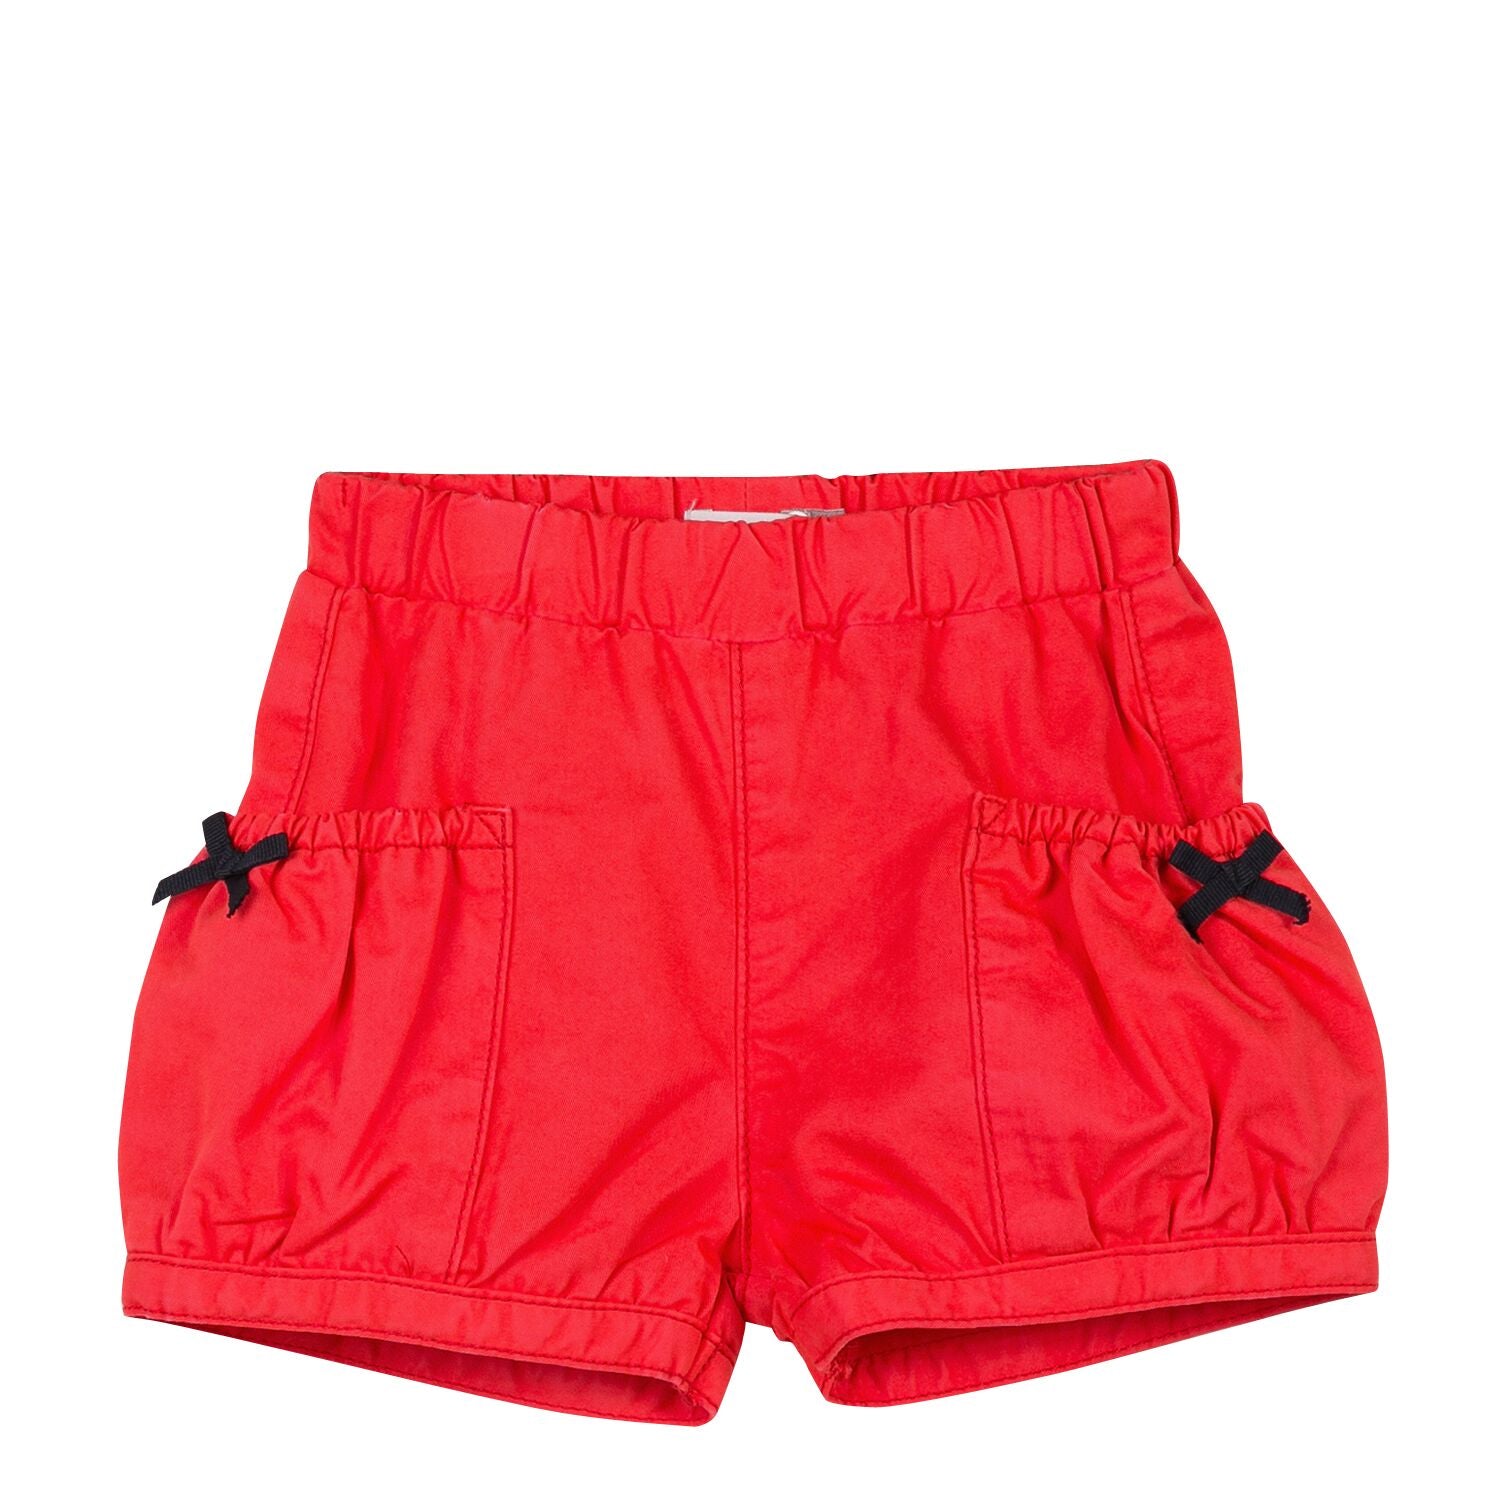 CATIMINI SHORTS WITH ELASTICATED WAIST CL26053 36